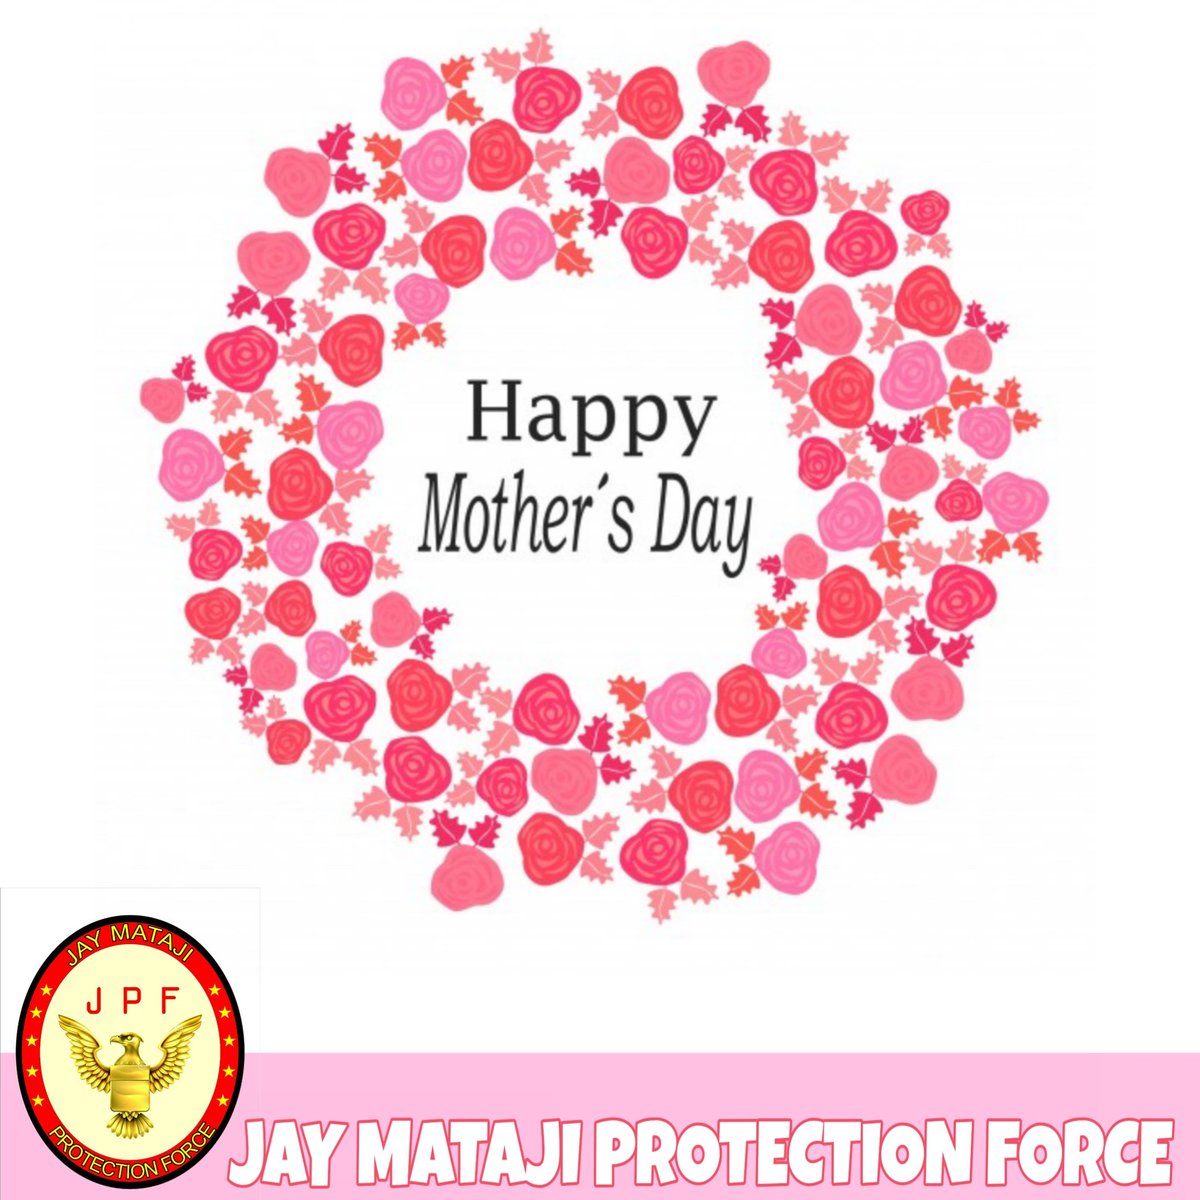 Happy Mother's Day  
#motherday
#BestSecurityServicesinGujarat #MallSecurity #ResidenceSecurity #SocietySecurityServices #EventSecurityServices #PersonalSecurityServices #Bodyguards #ArmGuards  #Force #PublicSecurity #CelebritySecurityServices #JayMatajiProtectionForce